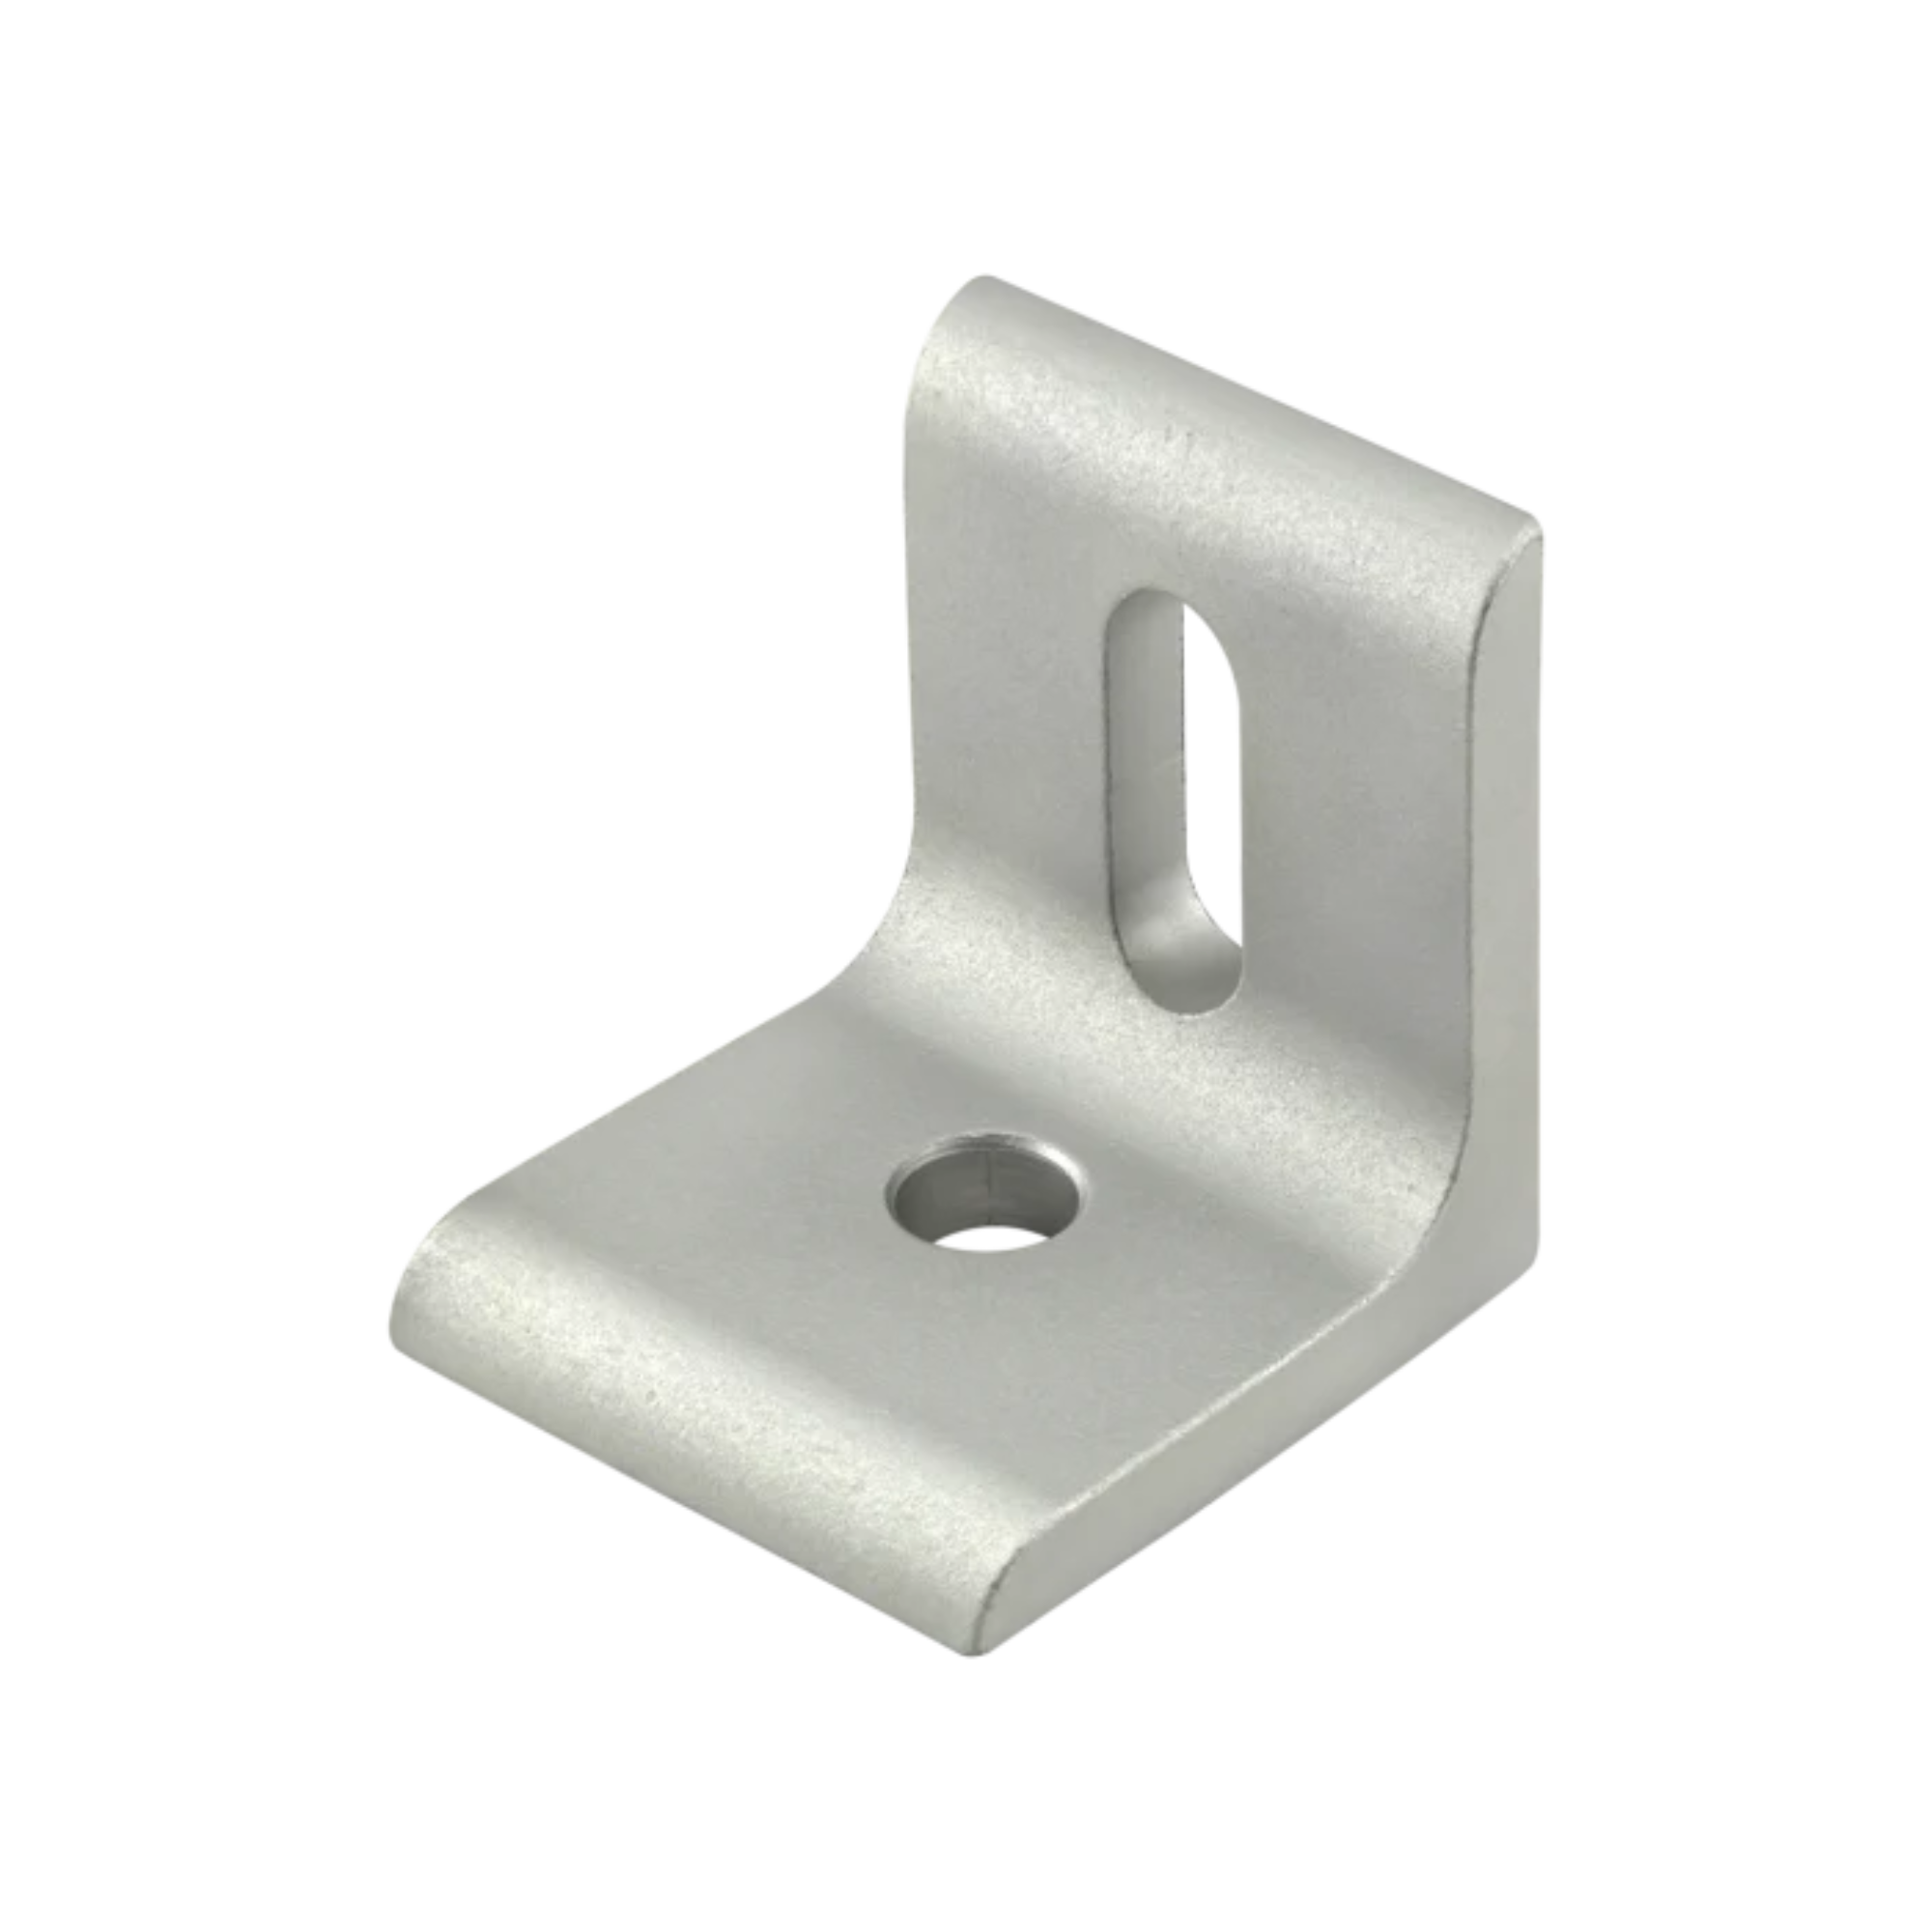 grey, metal corner bracket with the corner on the right side that has a round hole in the bottom piece and an oval hole in the side piece